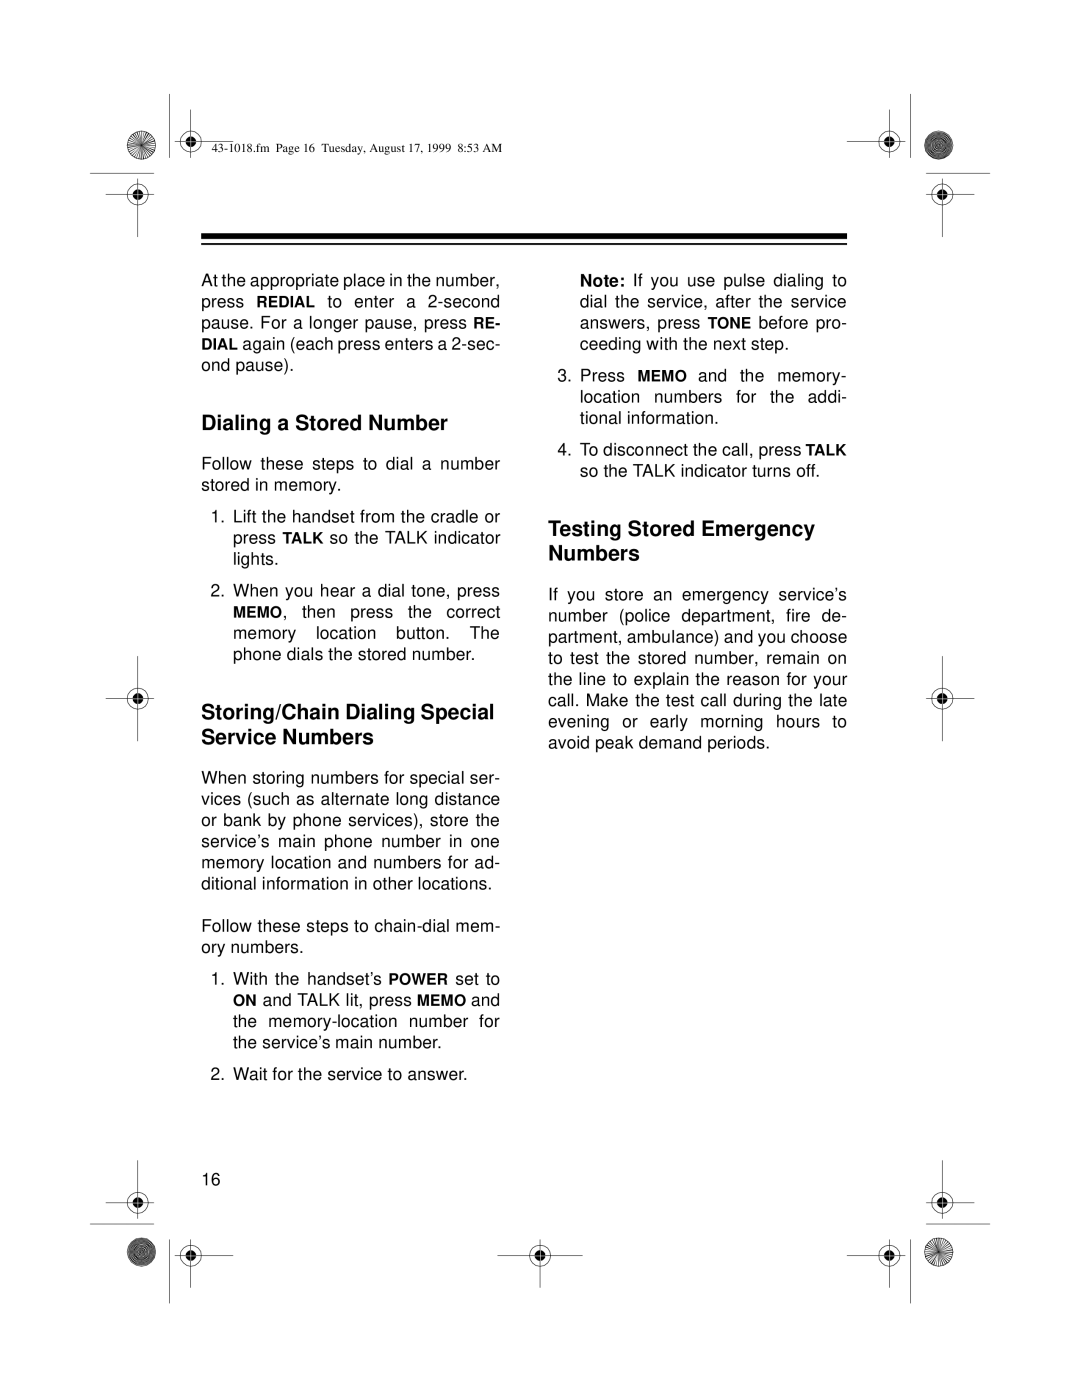 Radio Shack ET-518 owner manual Dialing a Stored Number, Storing/Chain Dialing Special Service Numbers 